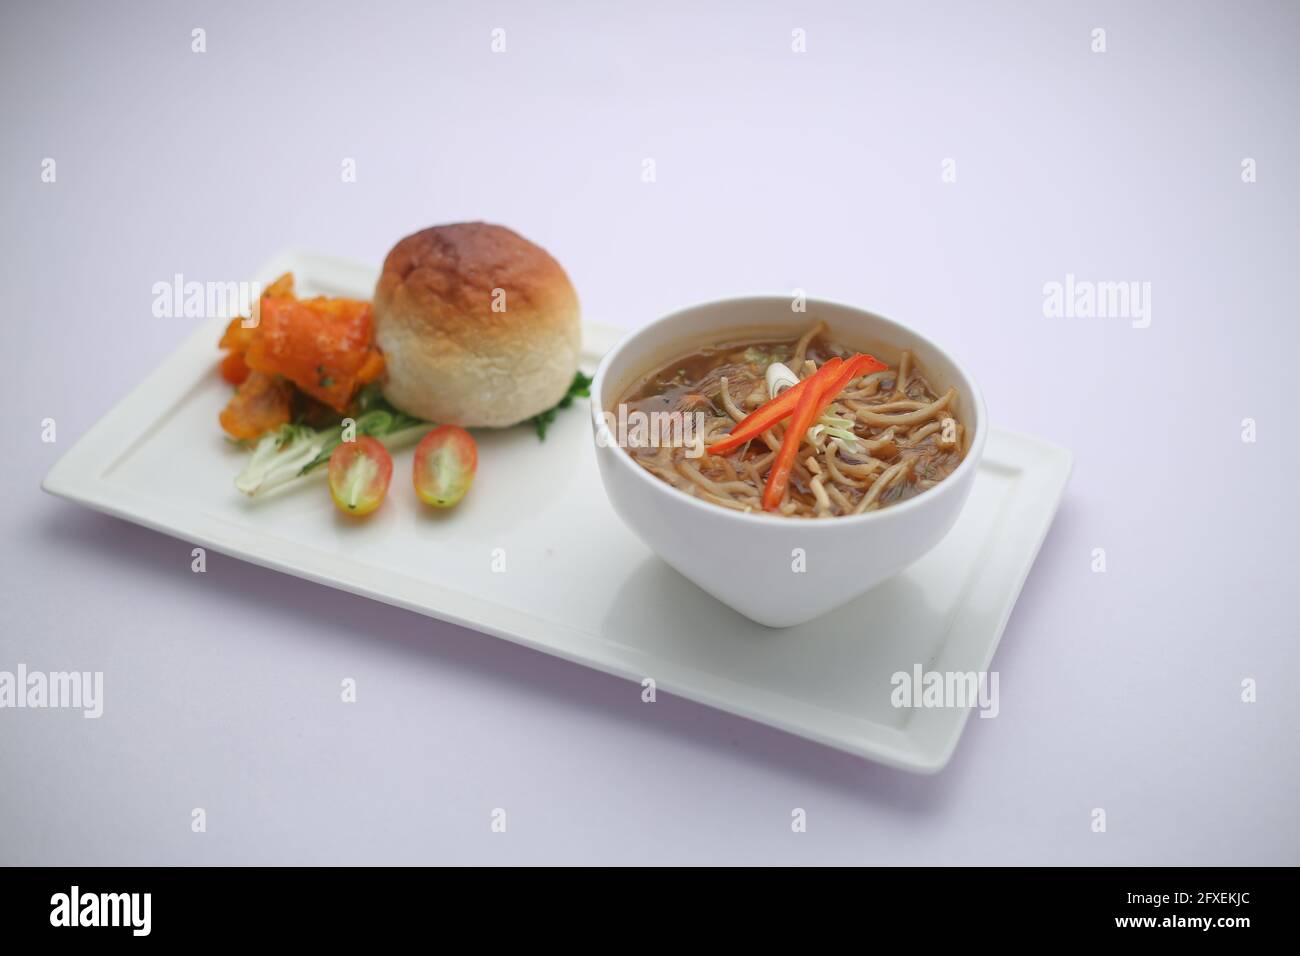 Chicken Manchow soup,garnished with vegetables and noodles arranged in a white bowl with white texture or background Stock Photo